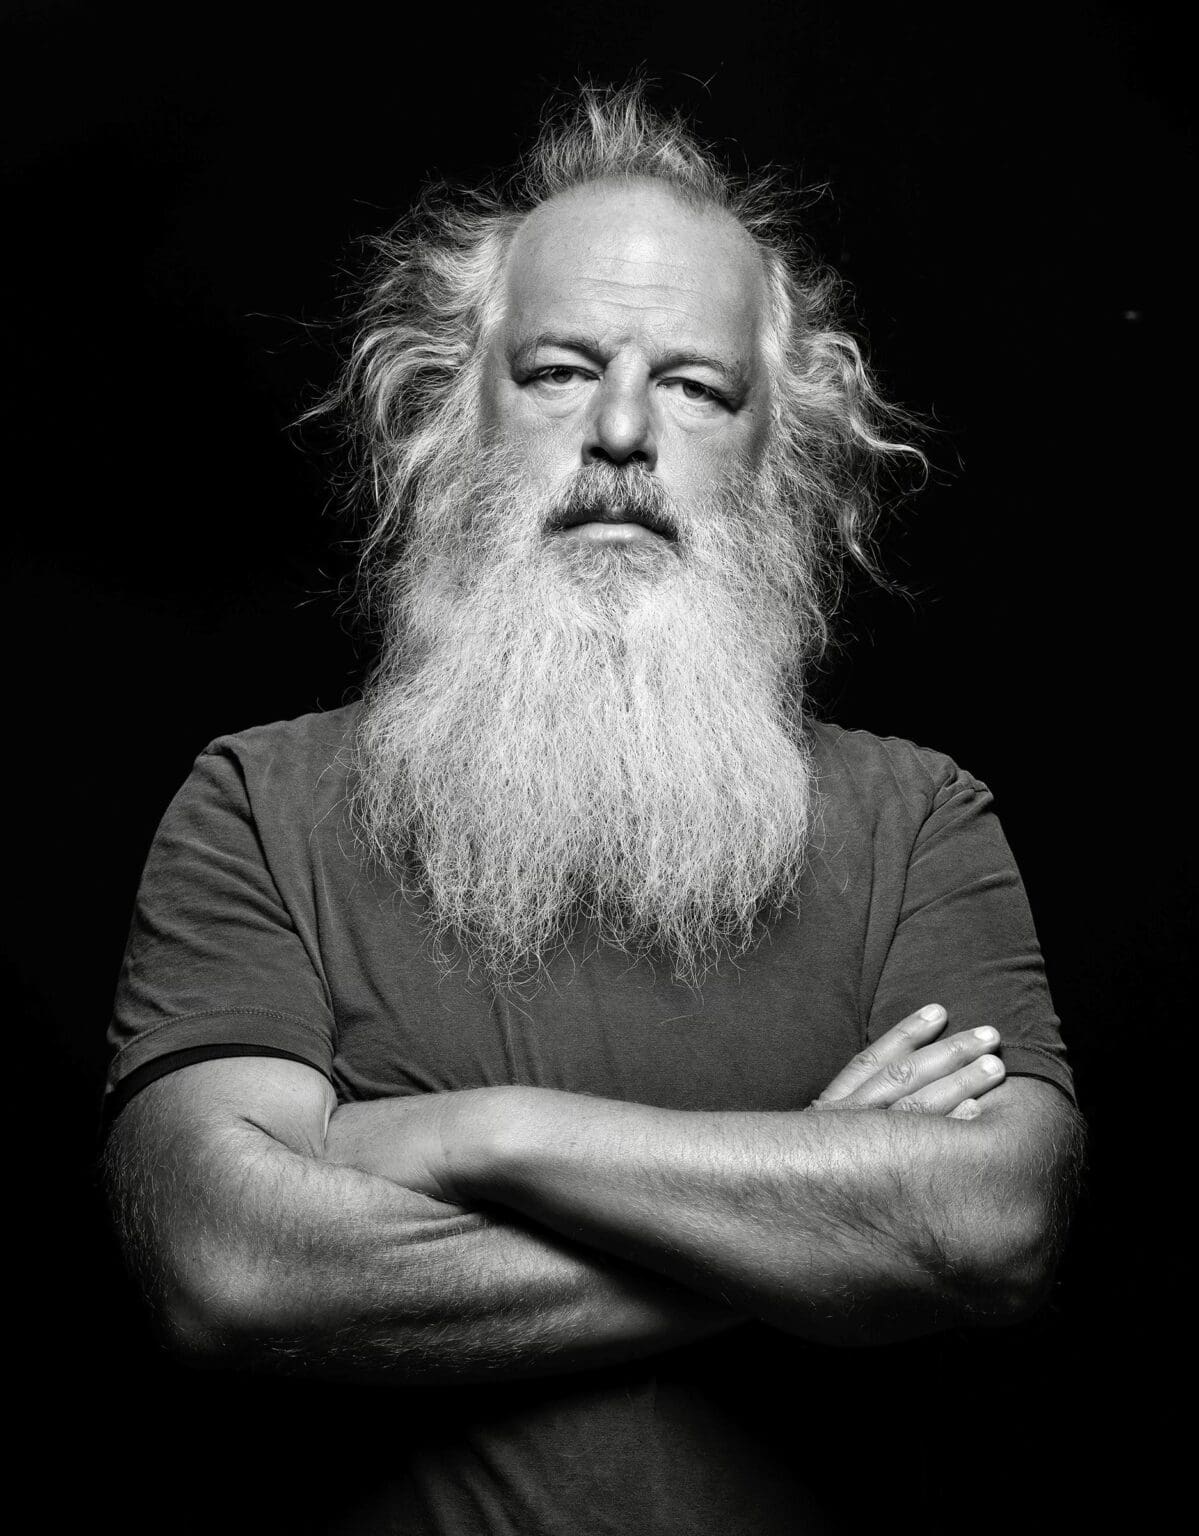 Legendary music producer and founder of Def Jam Recordings Rick Rubin is known for his light touch with artists and an ear for what’s profitable. His first book